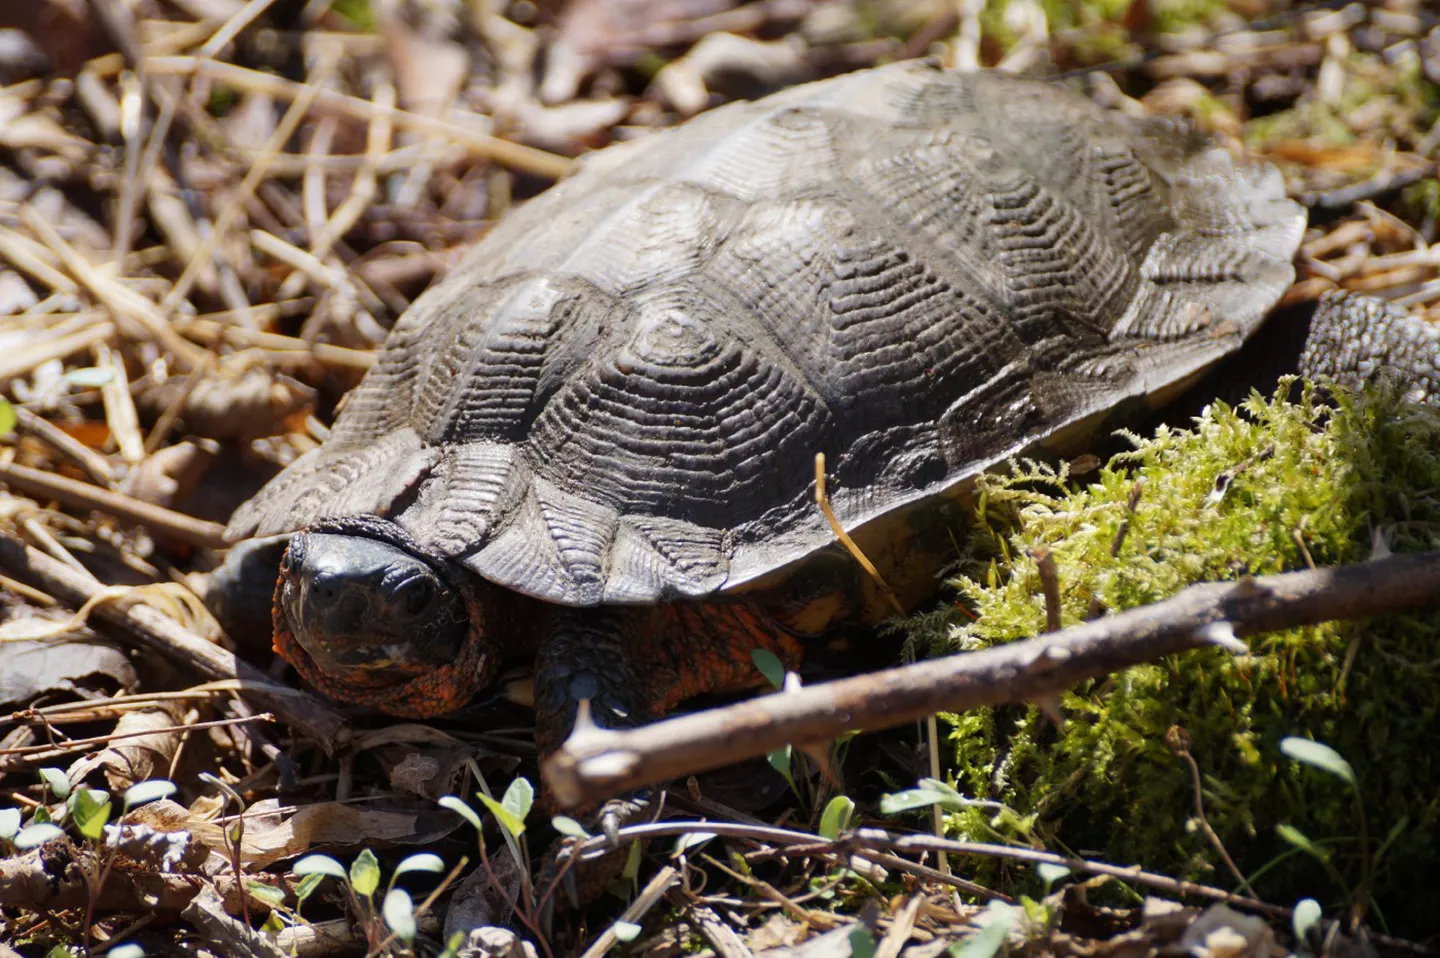 The wood turtle can be recognized by its or upper shell, which has pyramid shaped scutes with grooves that radiate from the center. Photo credit: Jared Green/USFWS.